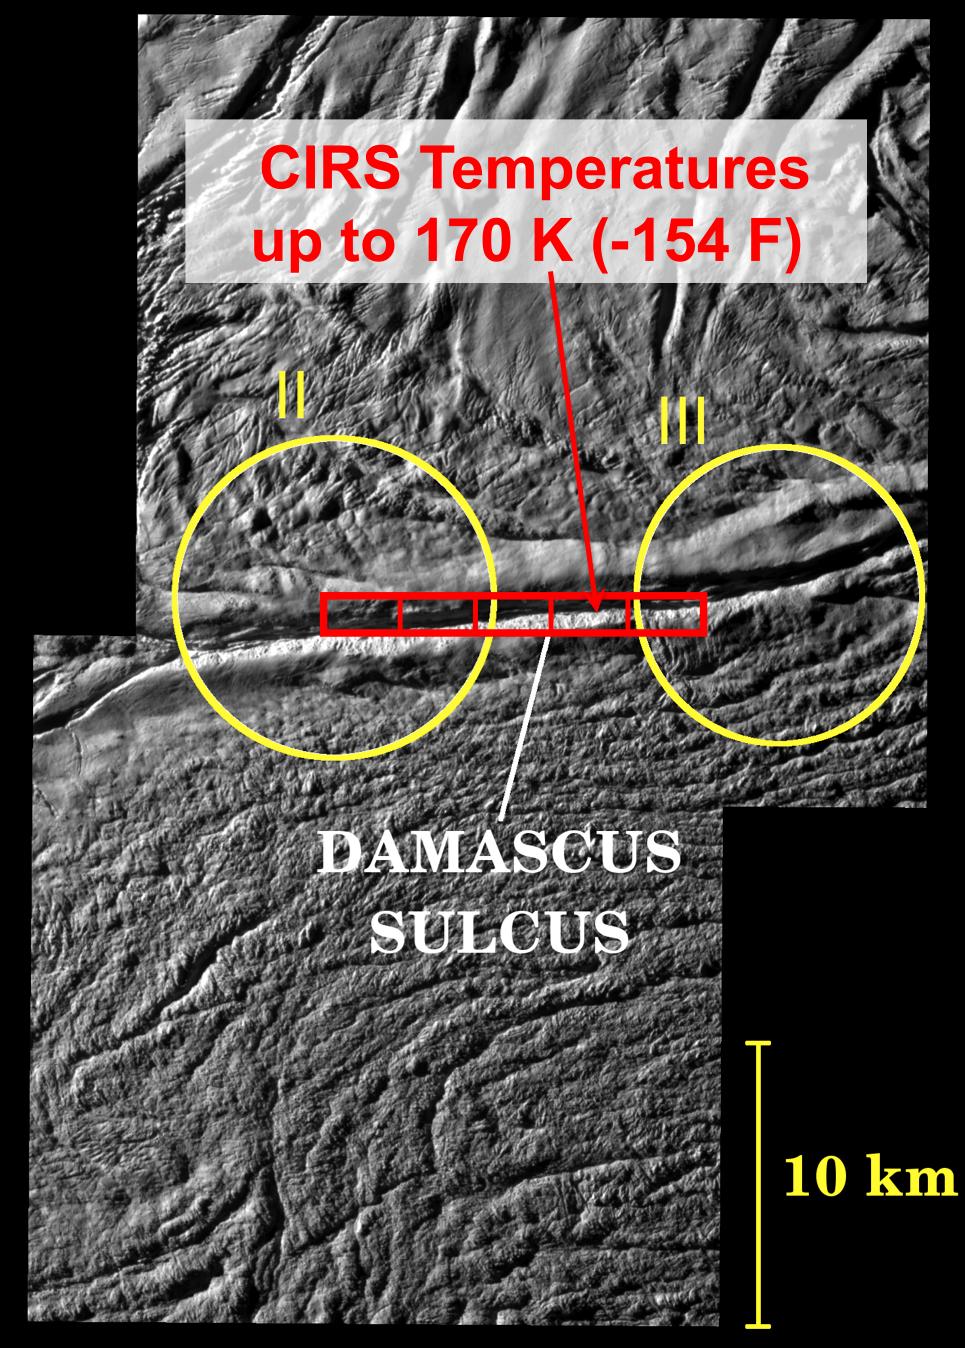 This image shows the location of Cassini's most precise measurements so far of the surface temperatures at the active 'tiger stripe' fractures that cut the south polar region of Enceladus.